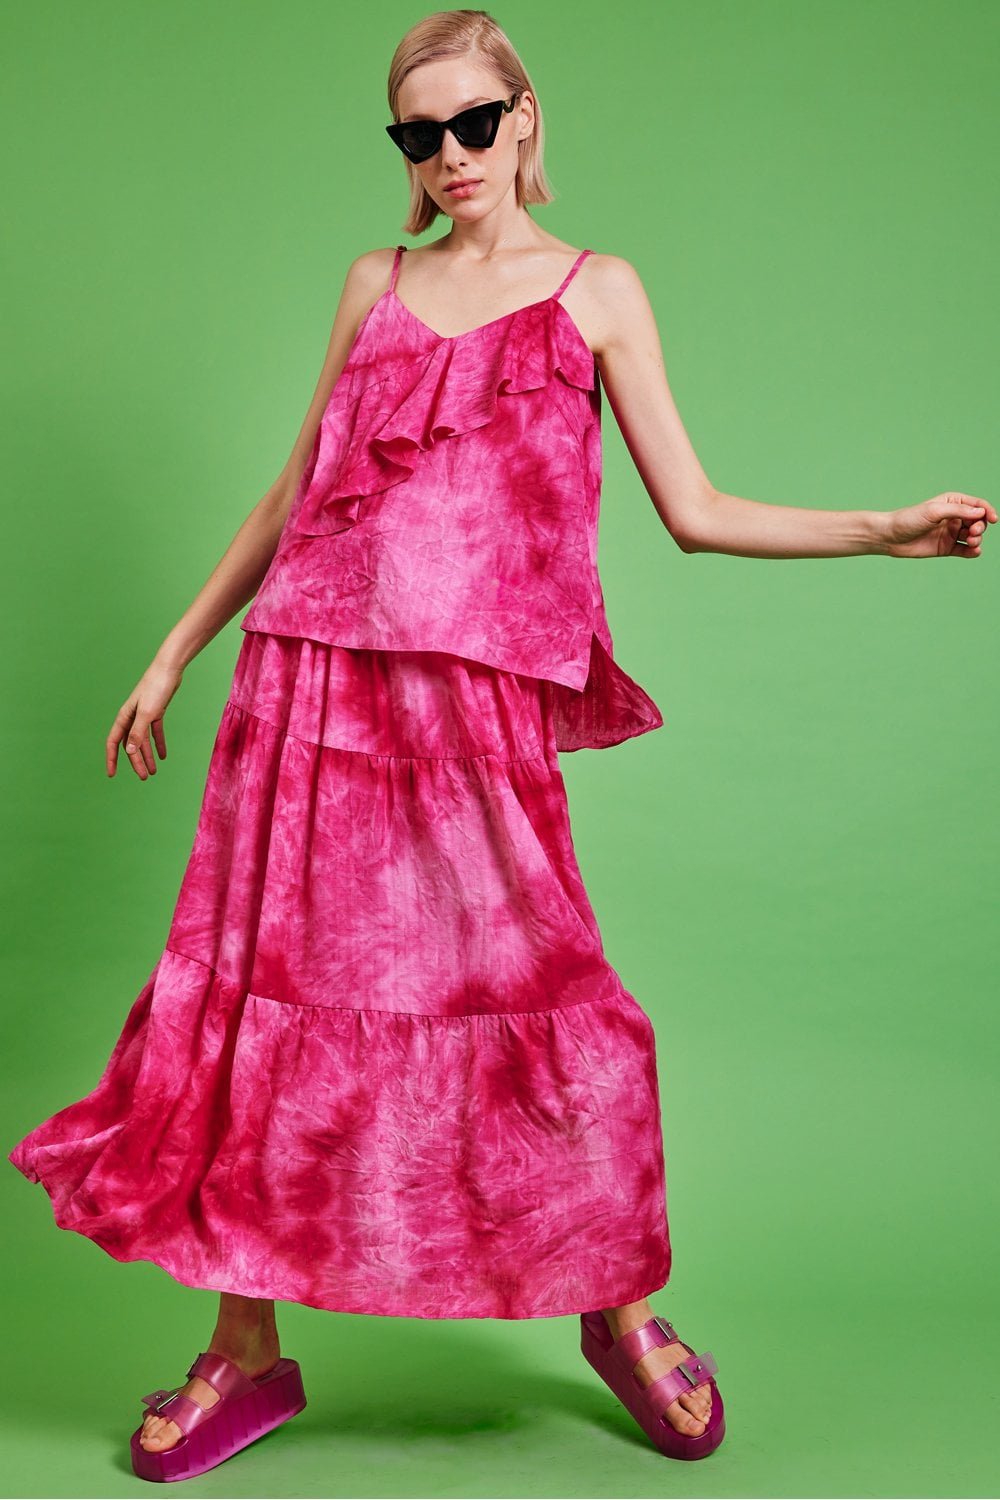 Shop Lux Love Herb Maxi Dress Skirt and women's luxury and designer clothes at www.lux-apparel.co.uk